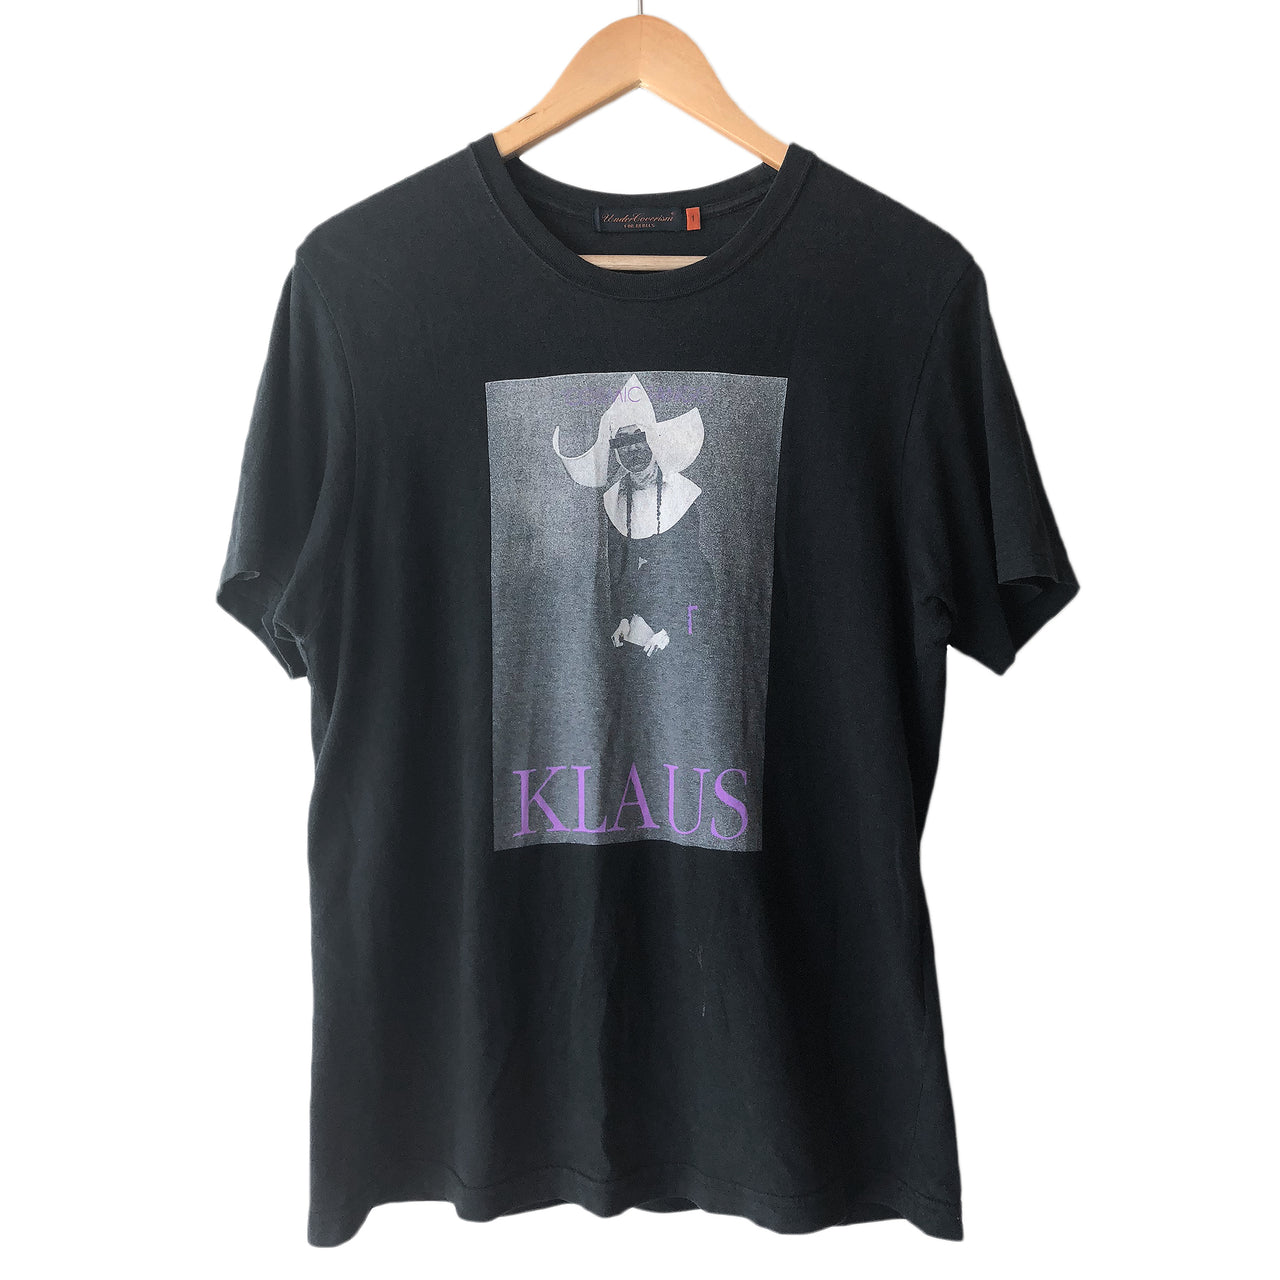 Undercover "Klaus" Tee - SS06 "T"